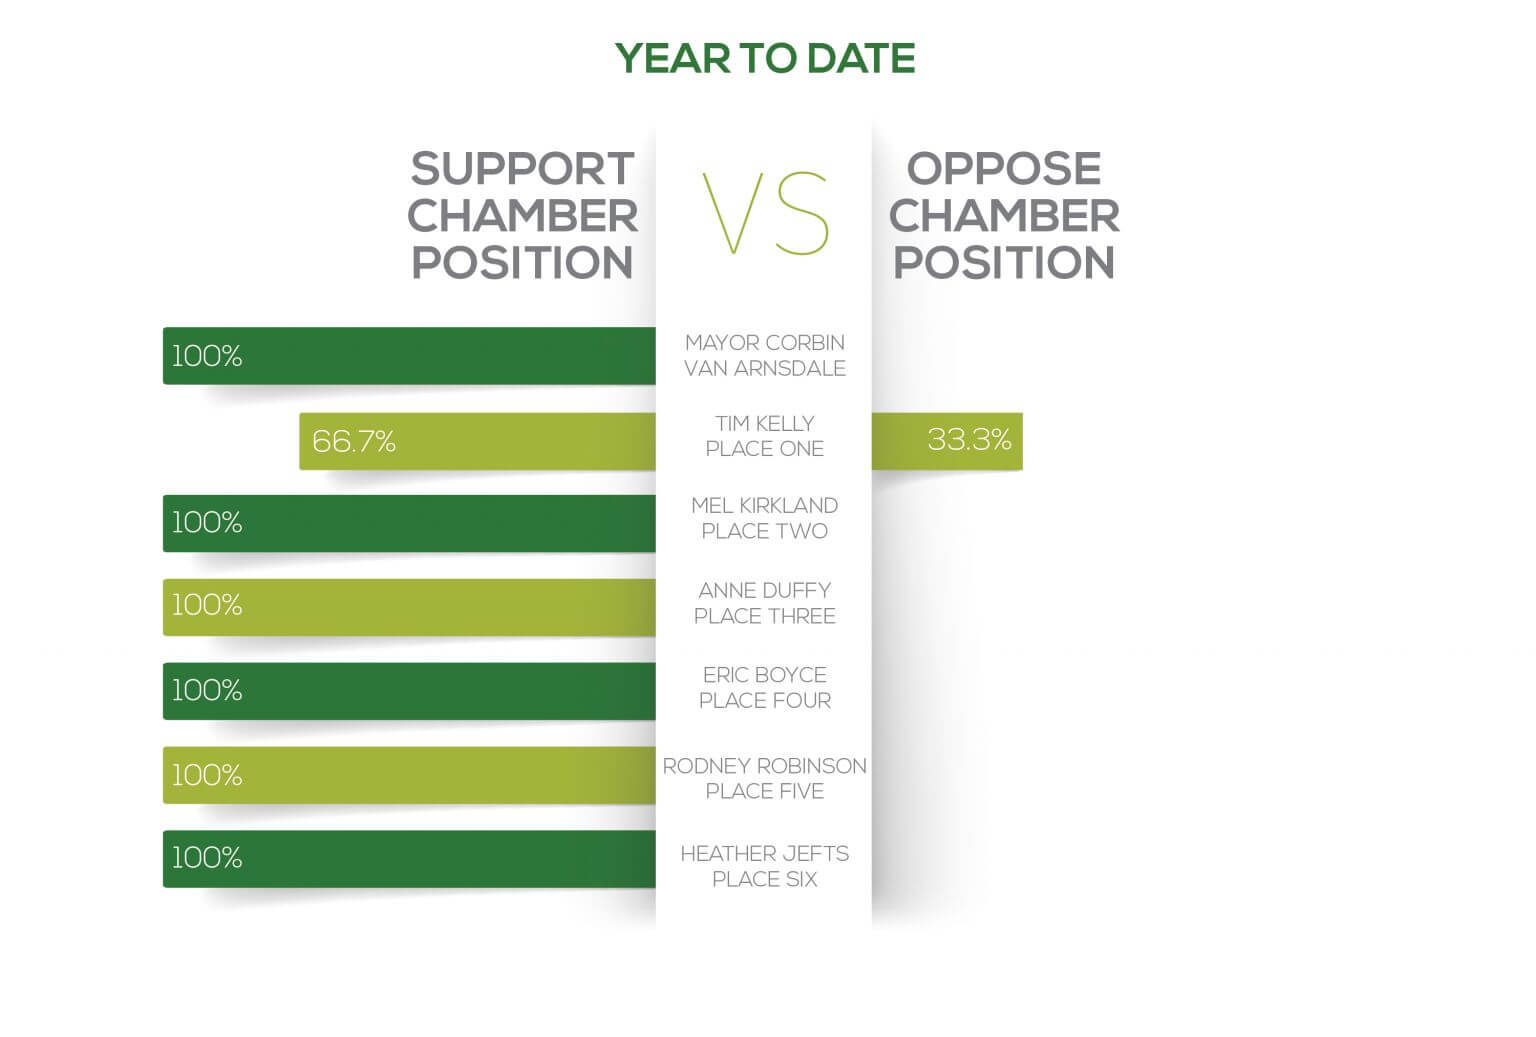 2021 Year to date supports chamber position